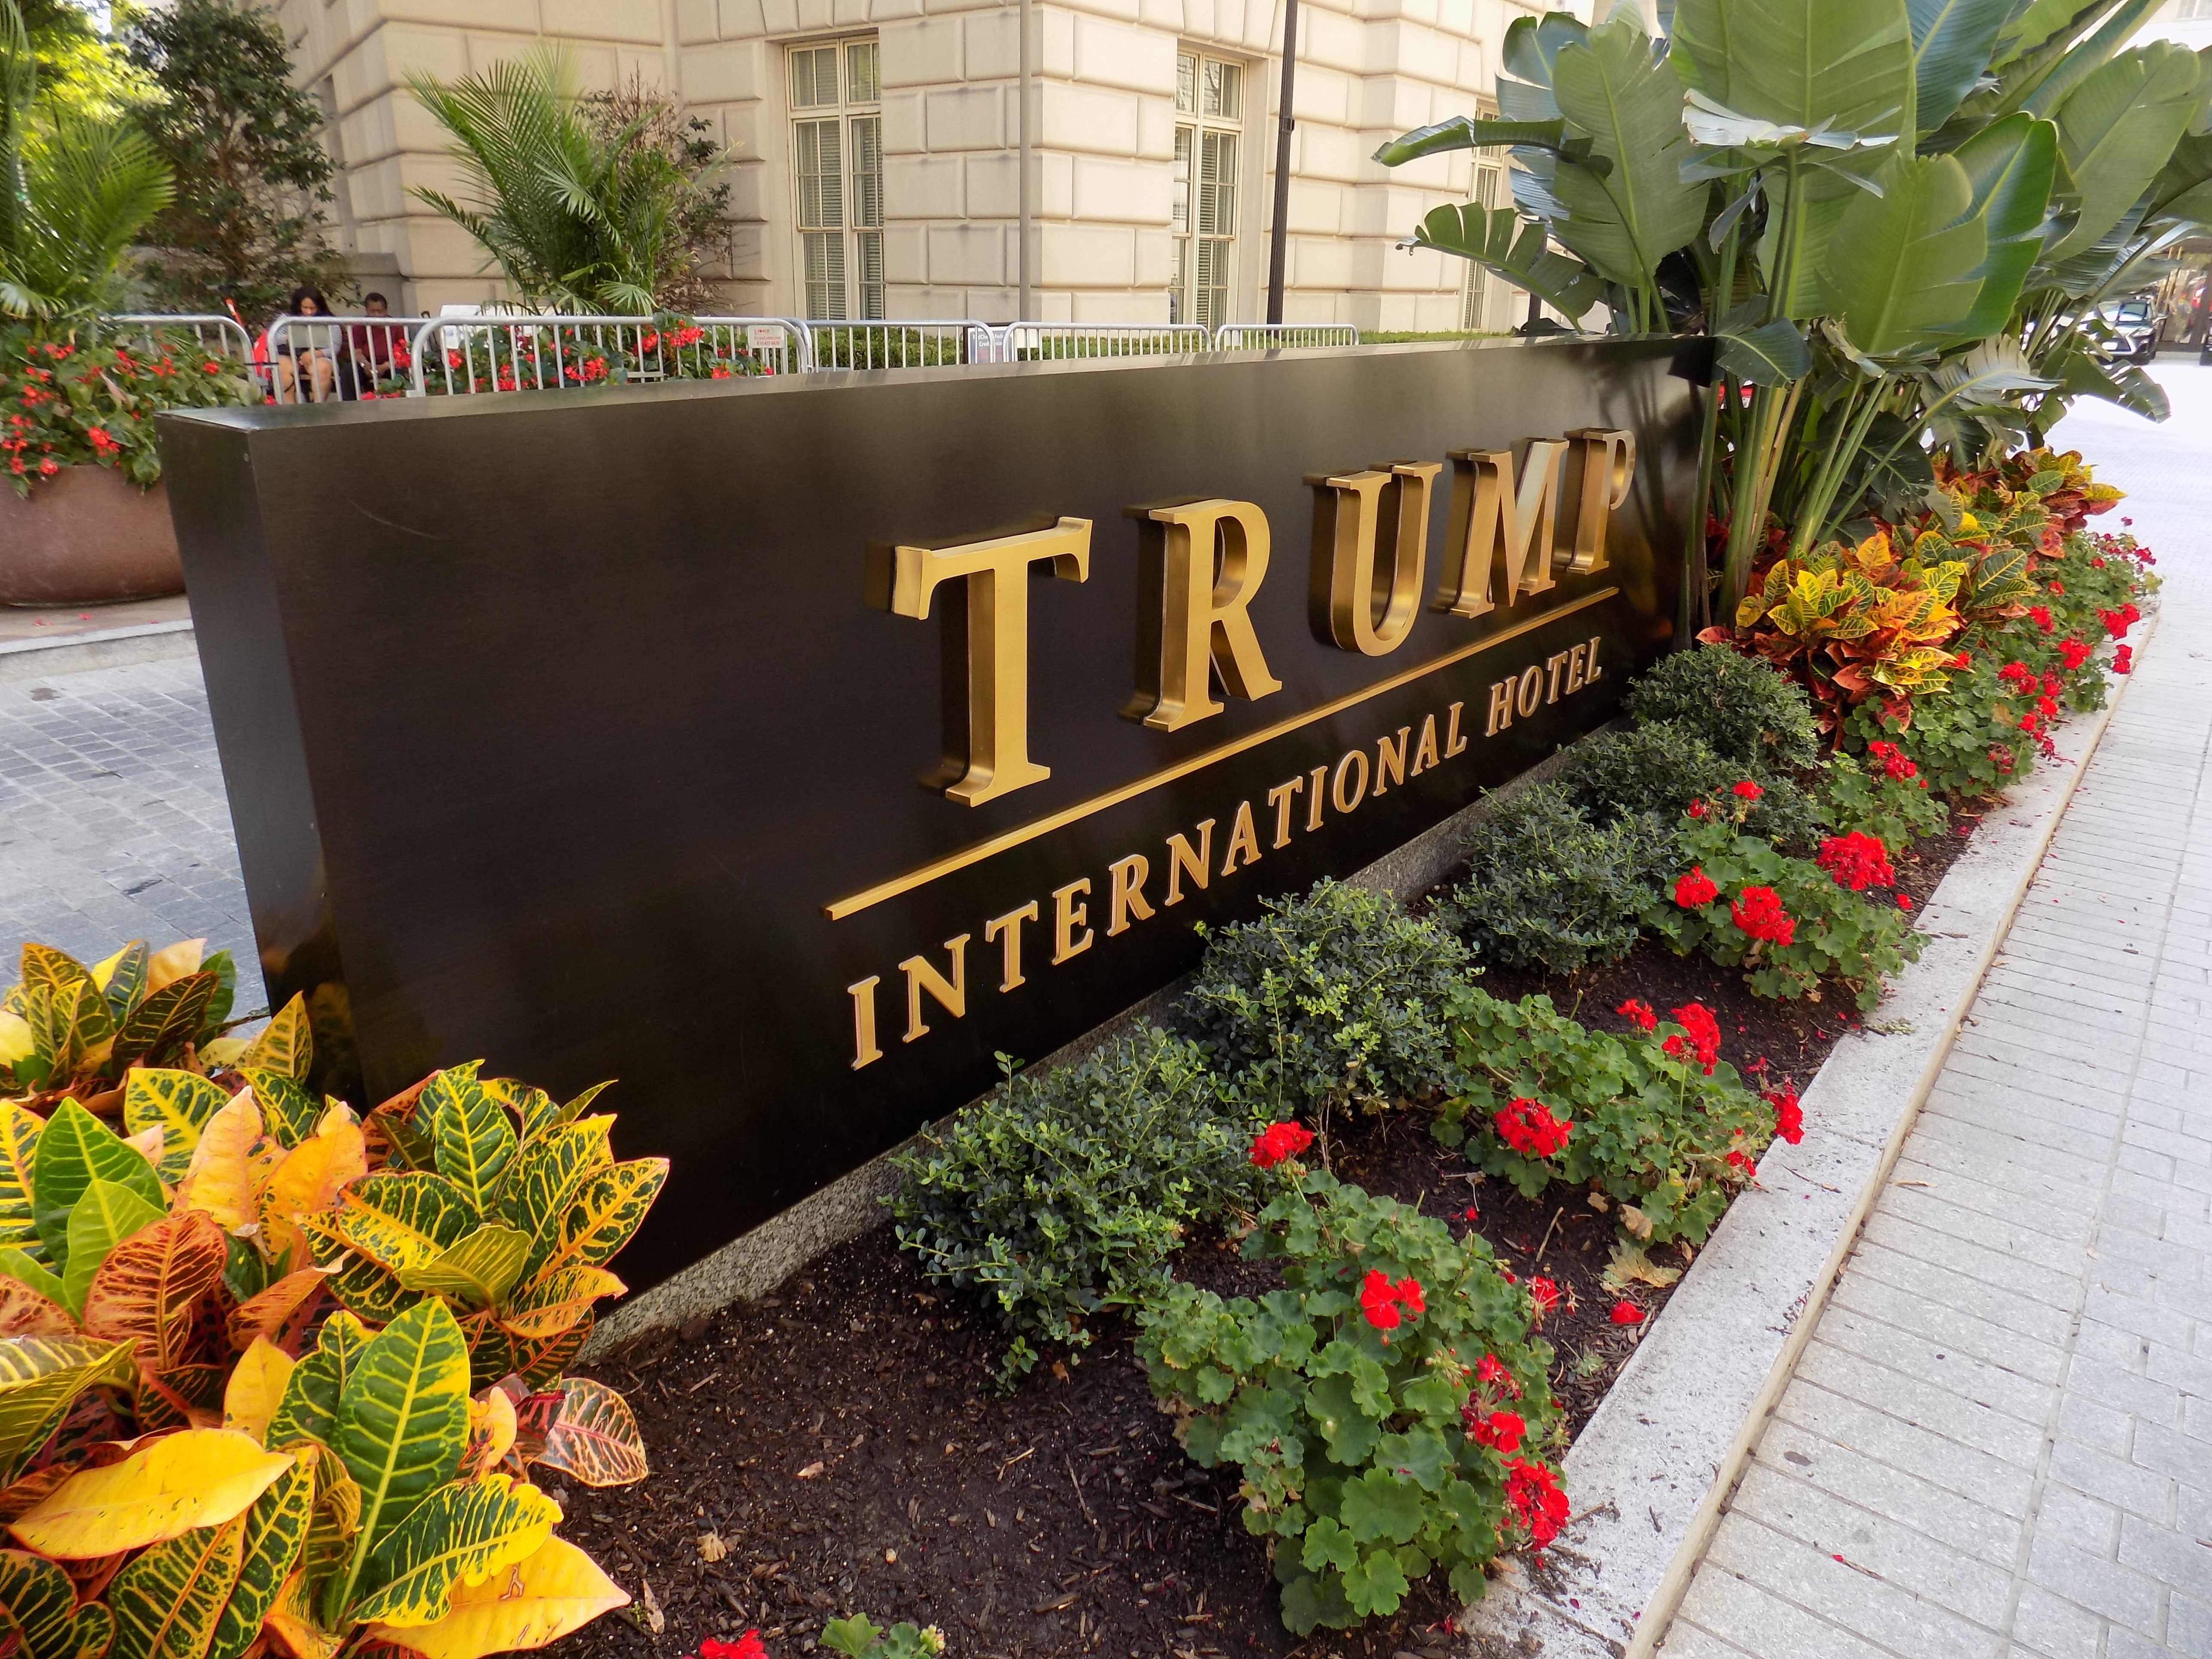 DC Trump Hotel Will Be Waldorf Astoria by End of April